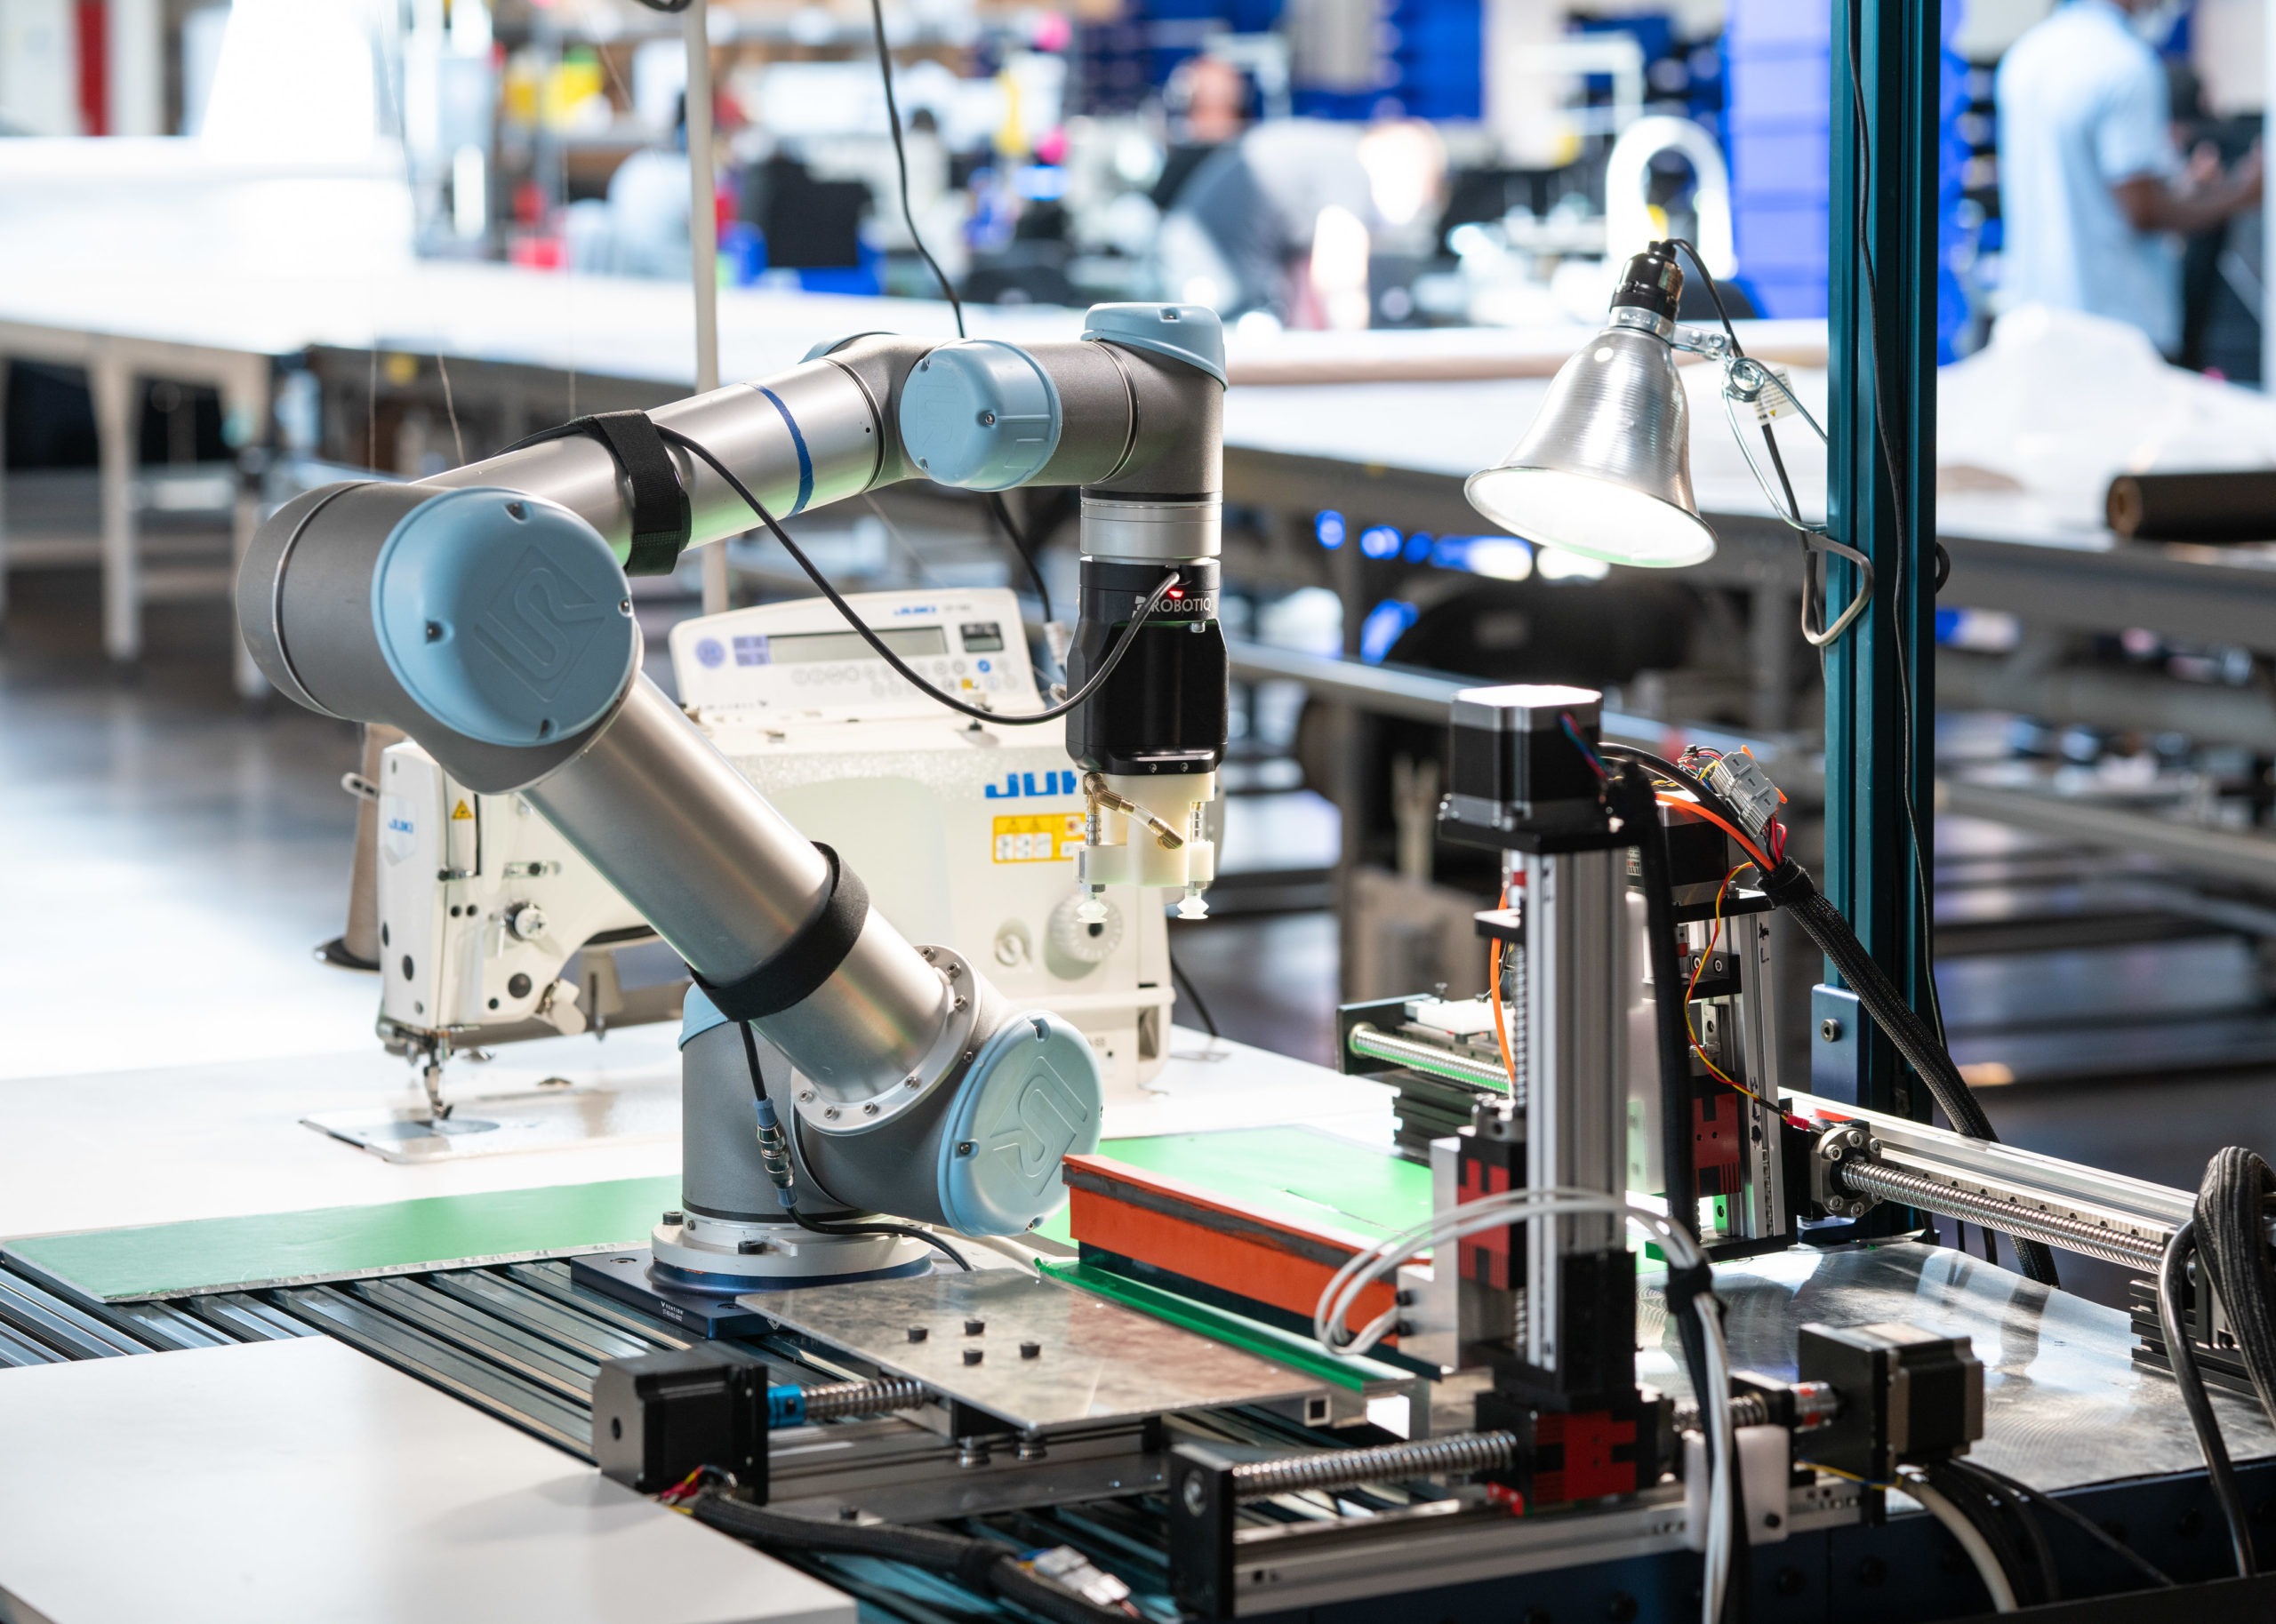 collaborative industrial robot positioned in front of a sewing machine with other automated tools adjacent